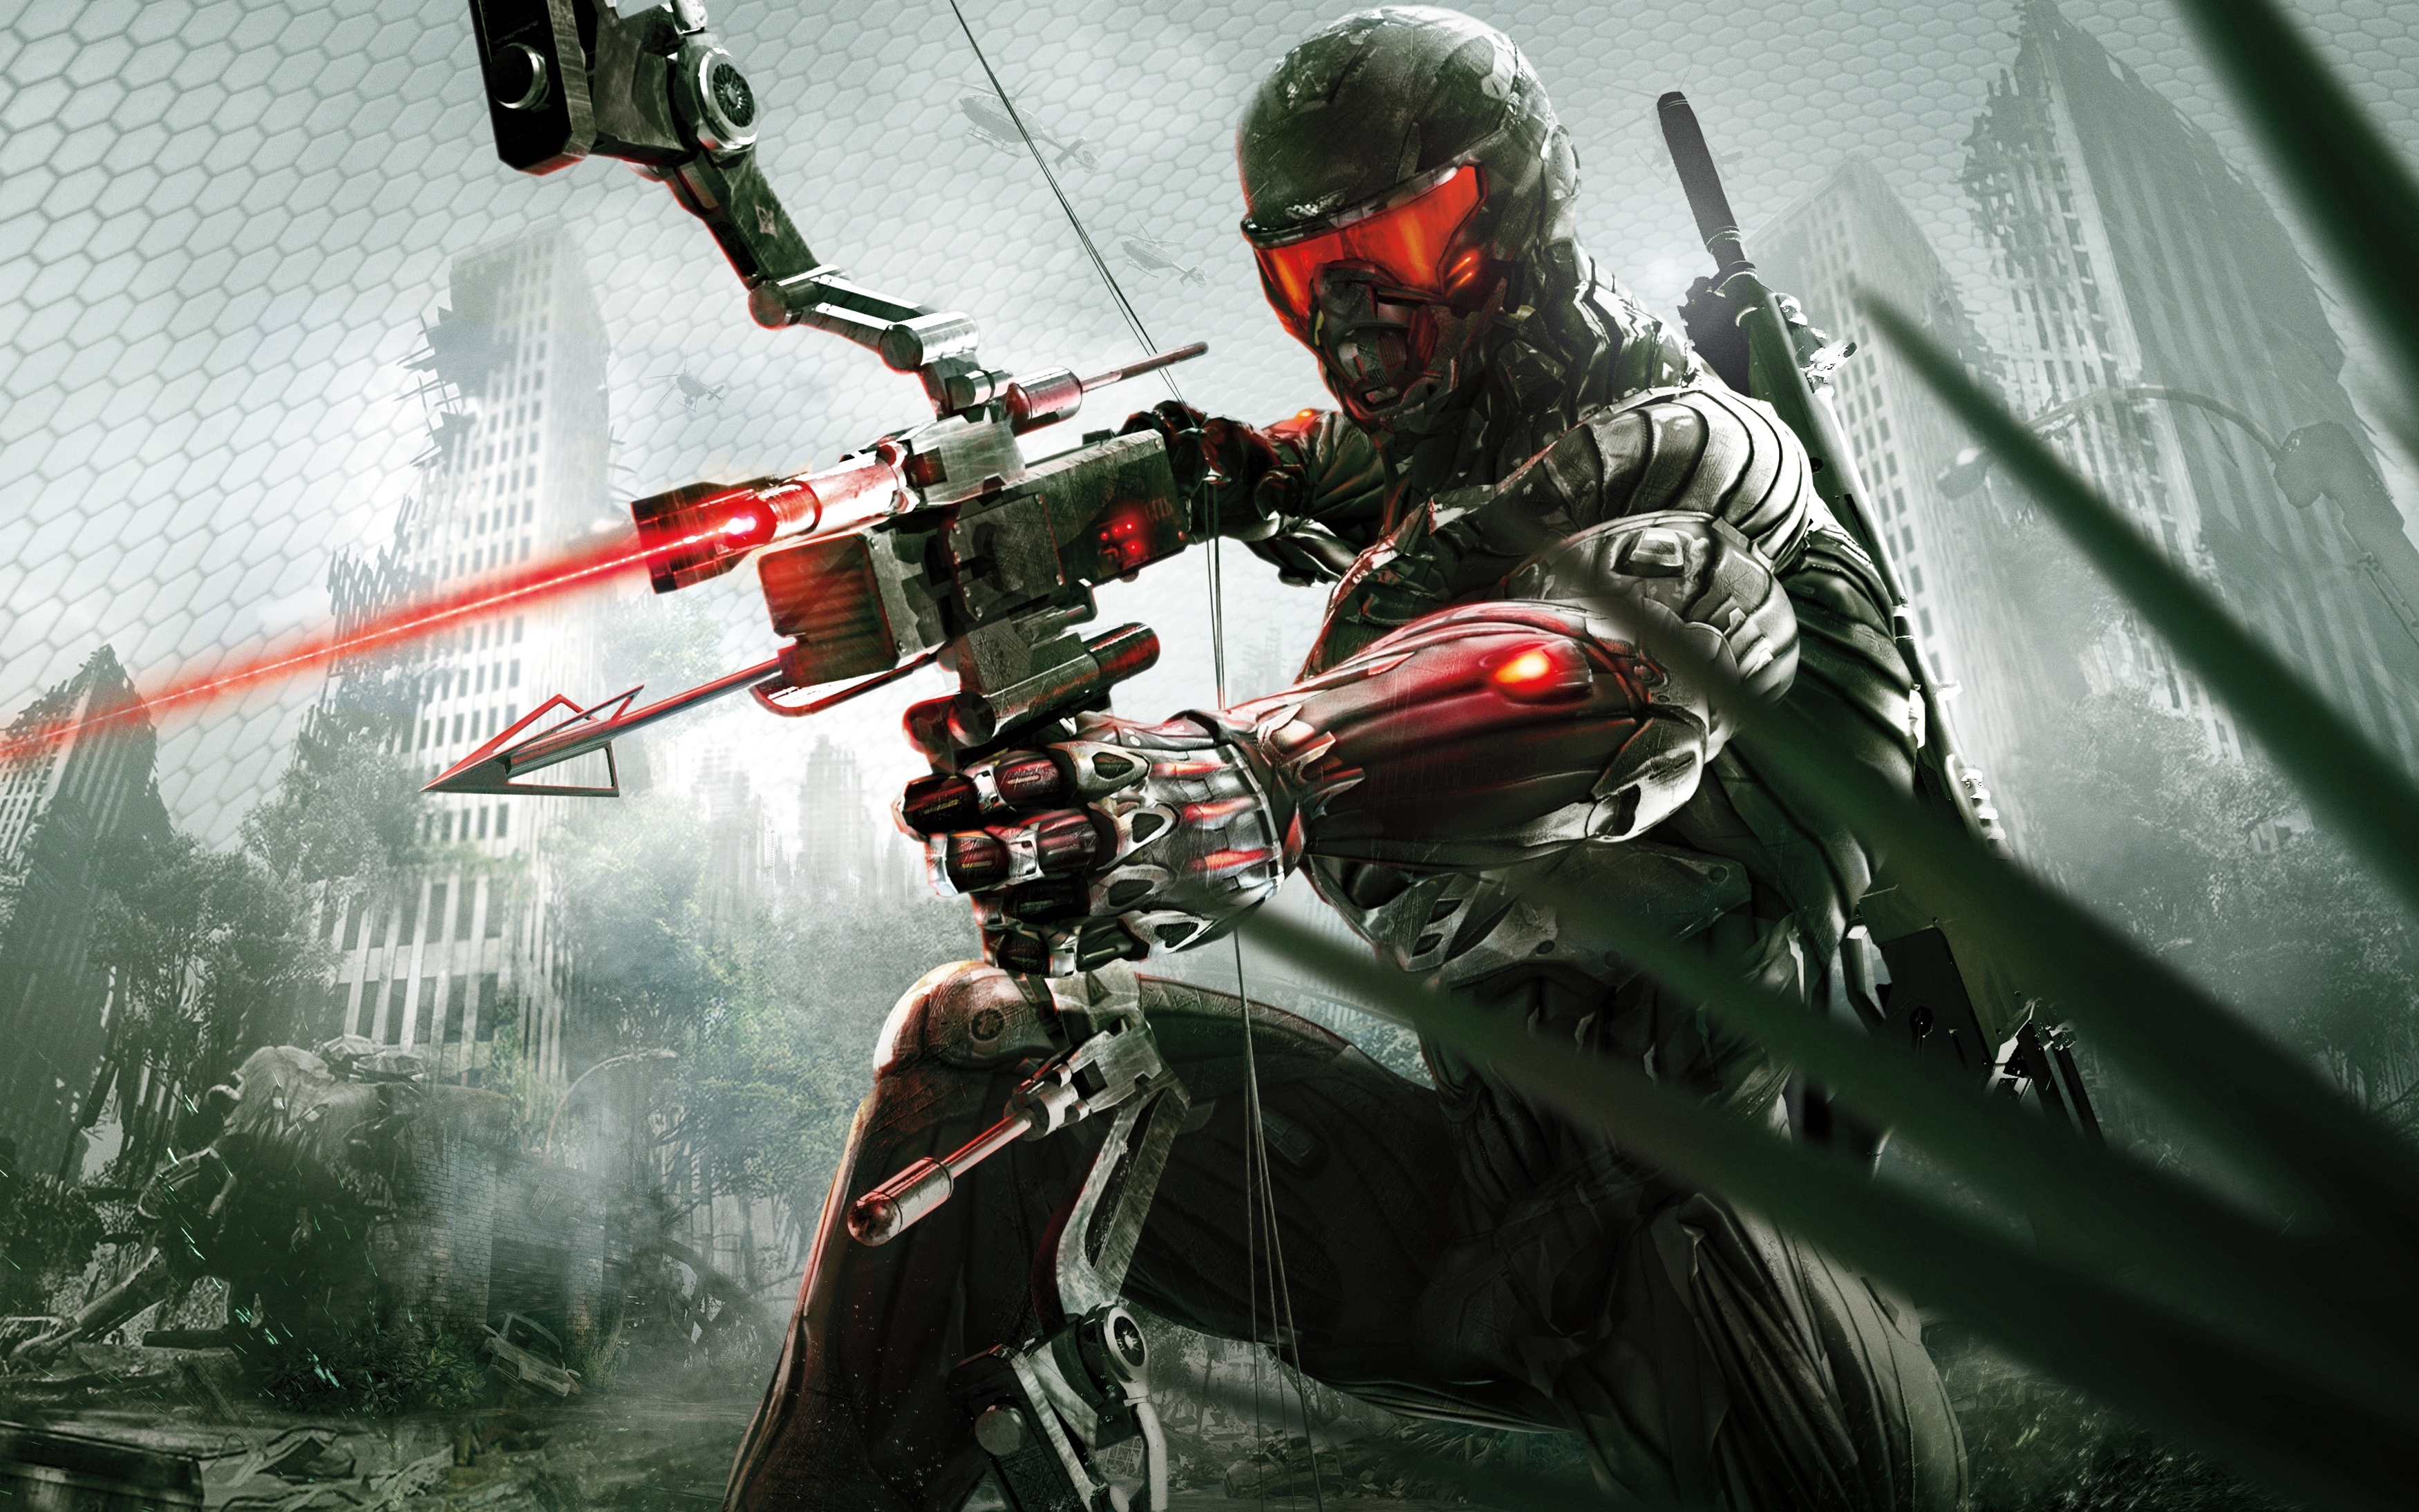 2013 crysis 3 wallpapers | hd wallpapers | id #11328